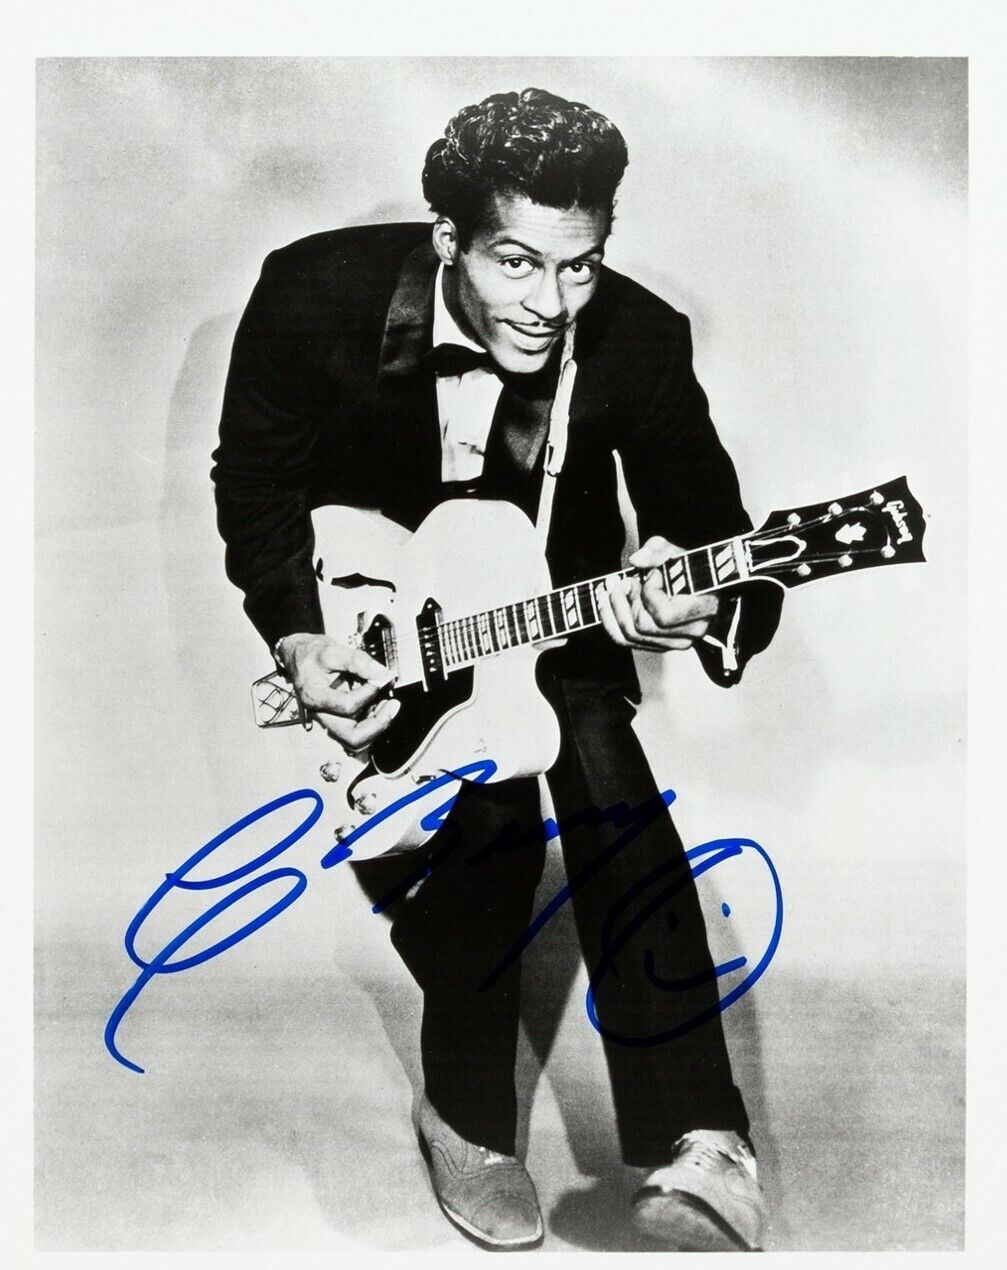 CHUCK BERRY Signed Photo Poster paintinggraph - Guitarist / Singer / Songwriter preprint